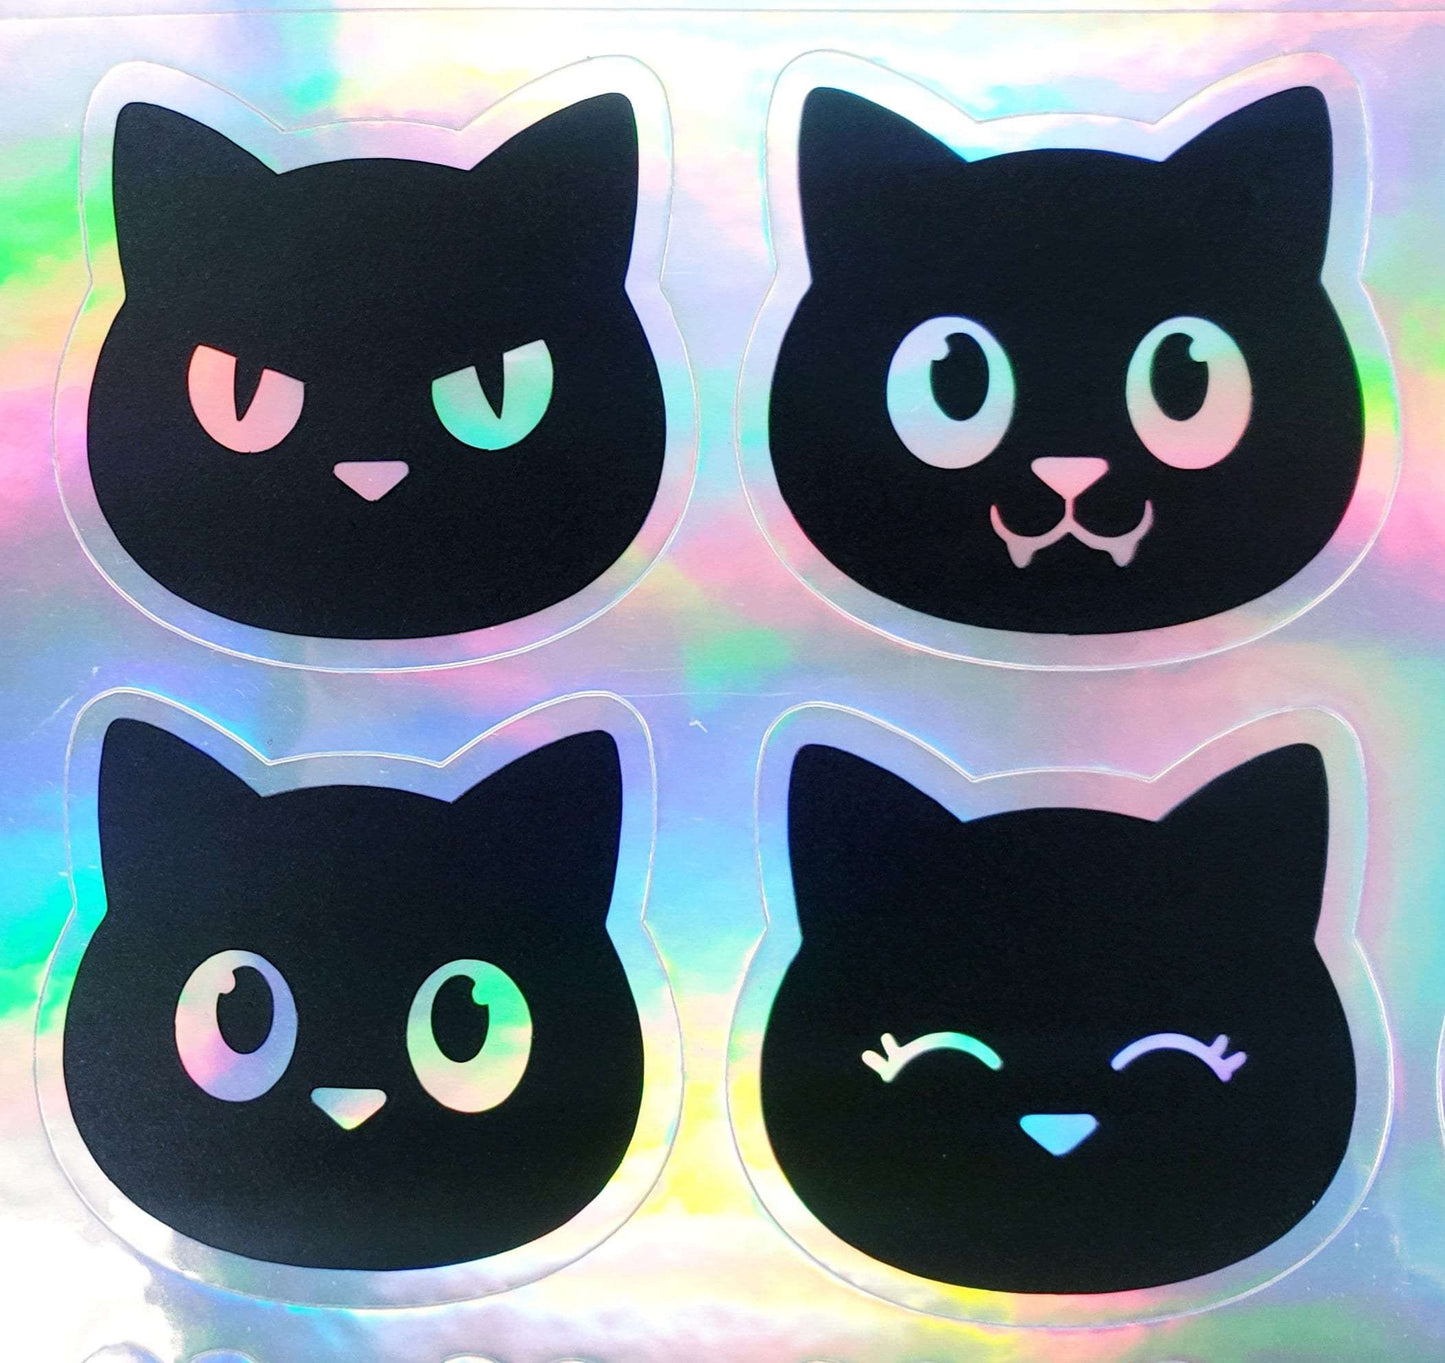 Black Scaredy Cat Holographic Sticker for water bottle, laptop or journal cover.